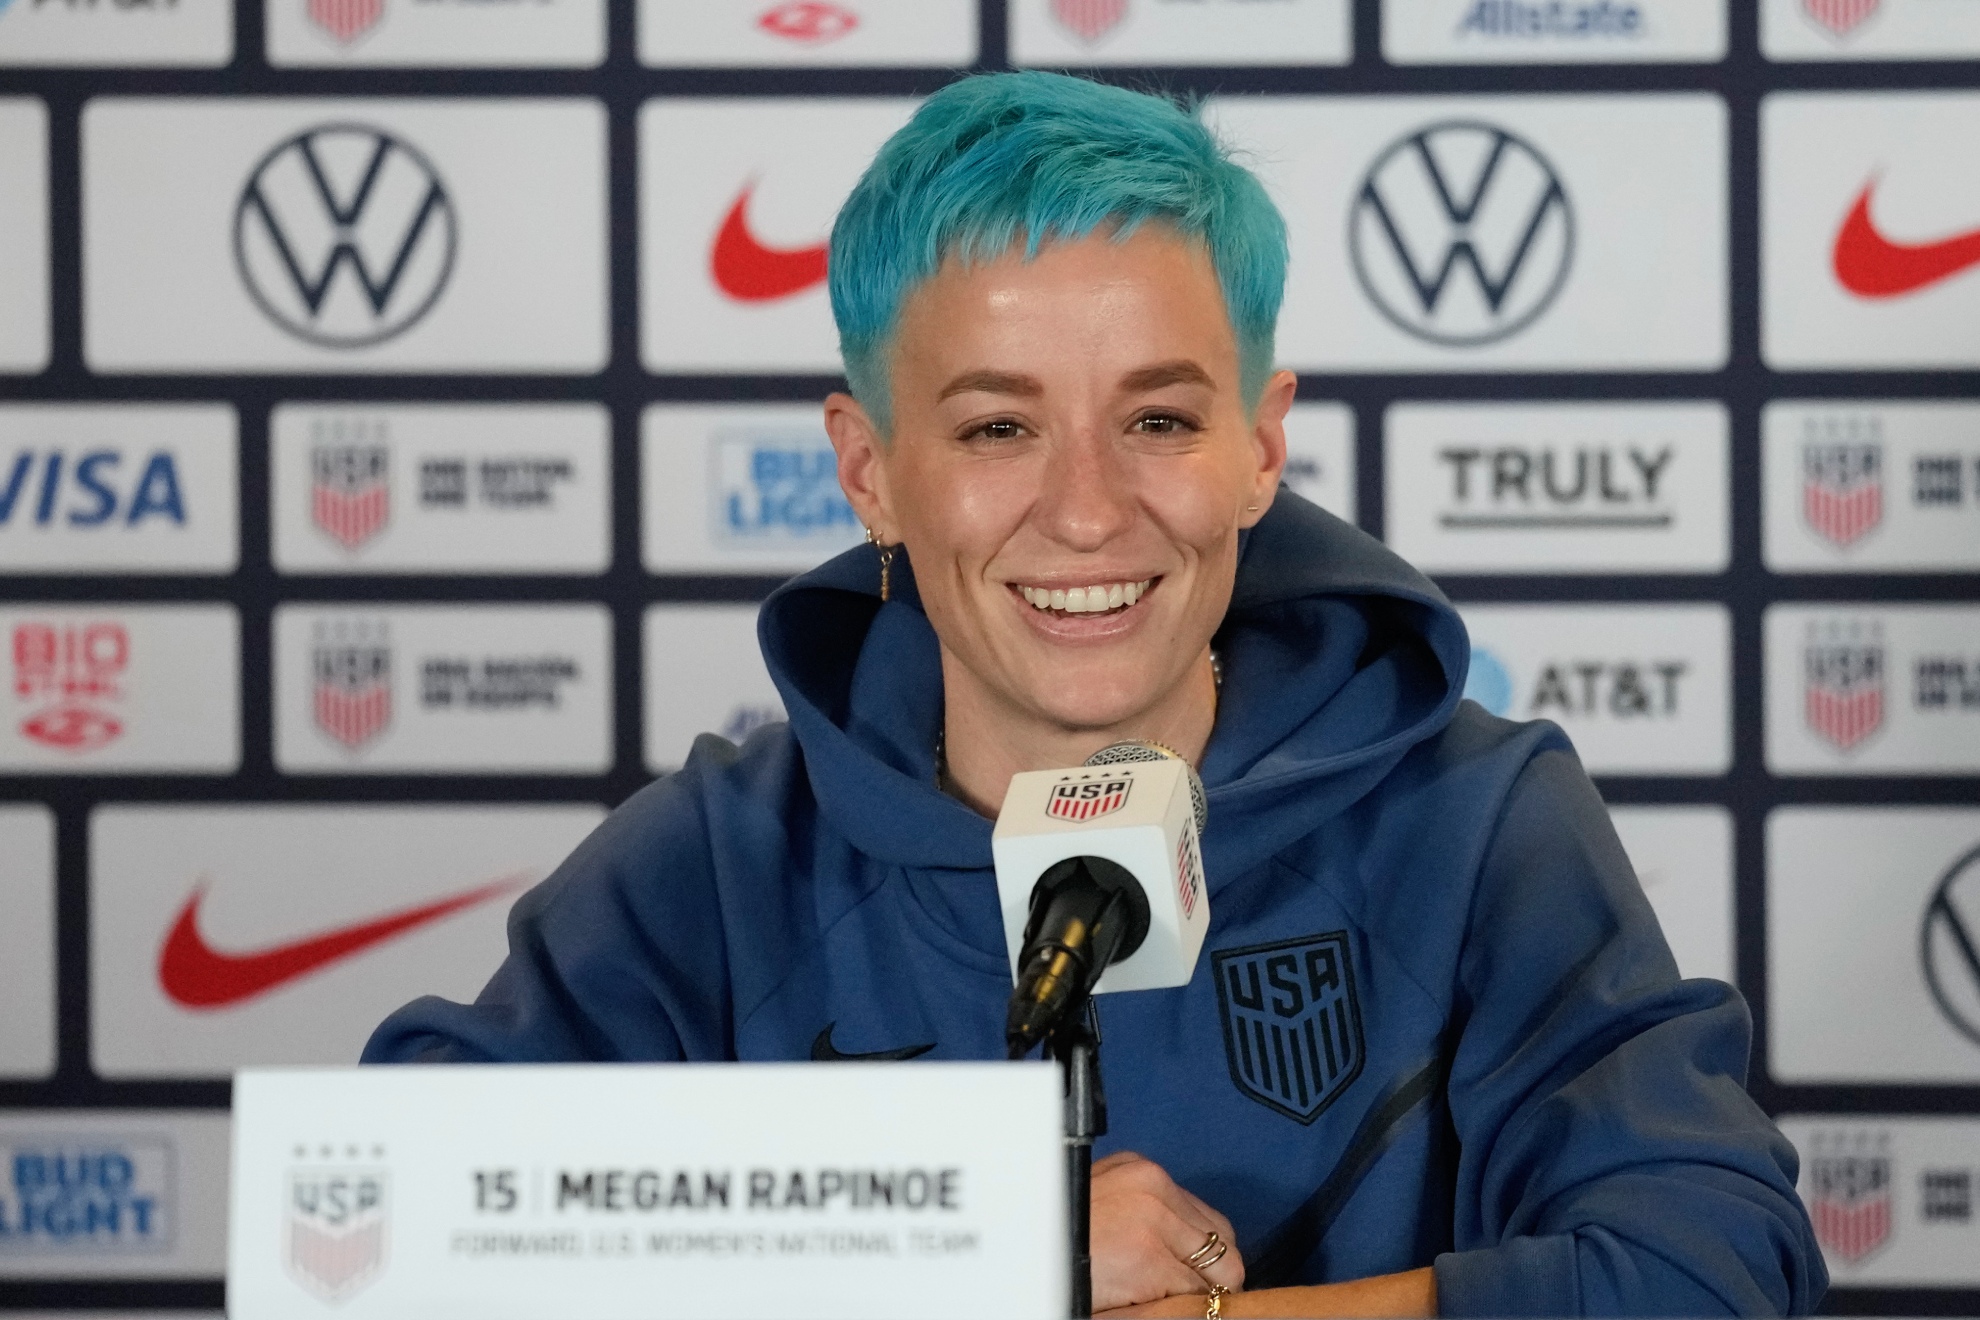 Megan Rapinoe idolized by adoring teammates: "She allows us to be who we really are"